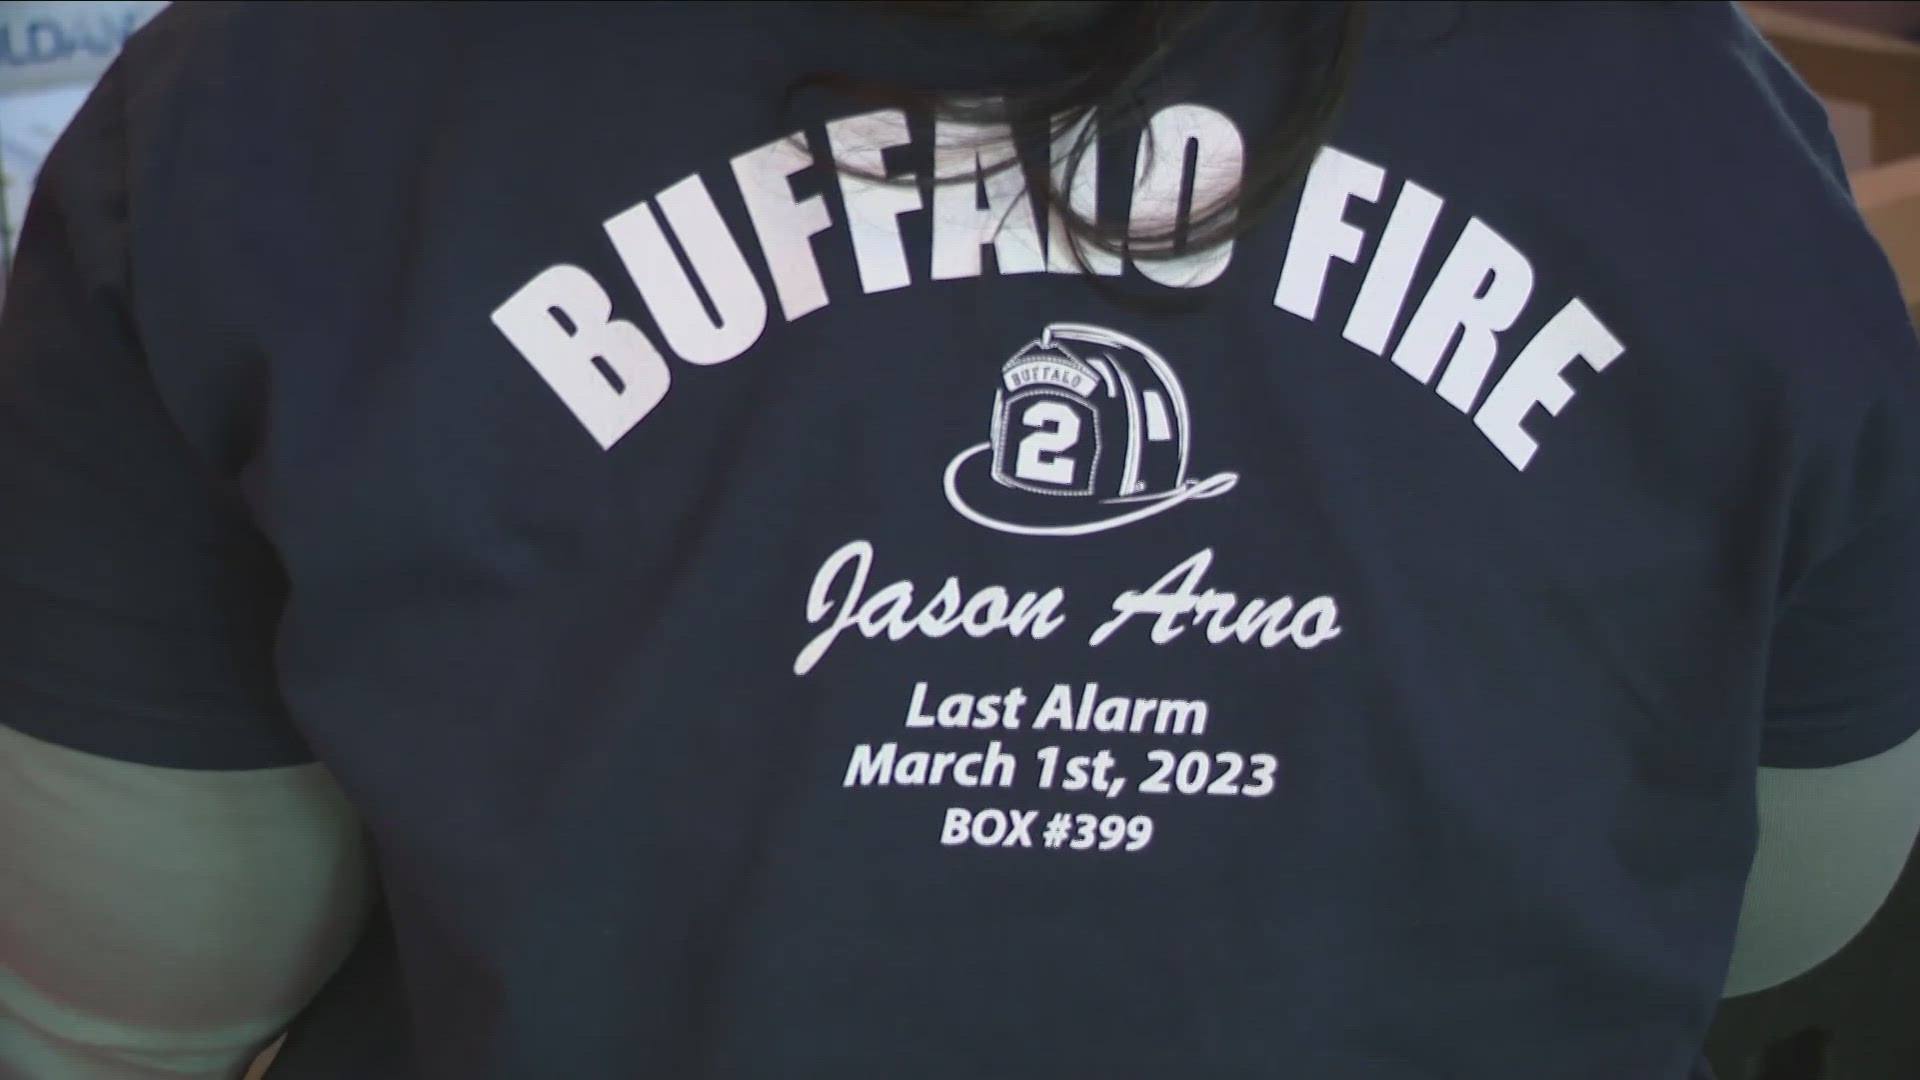 From benefits and fundraisers by local businesses to busloads of firemen coming in from out of town, Jason Arno is being remembered by many.